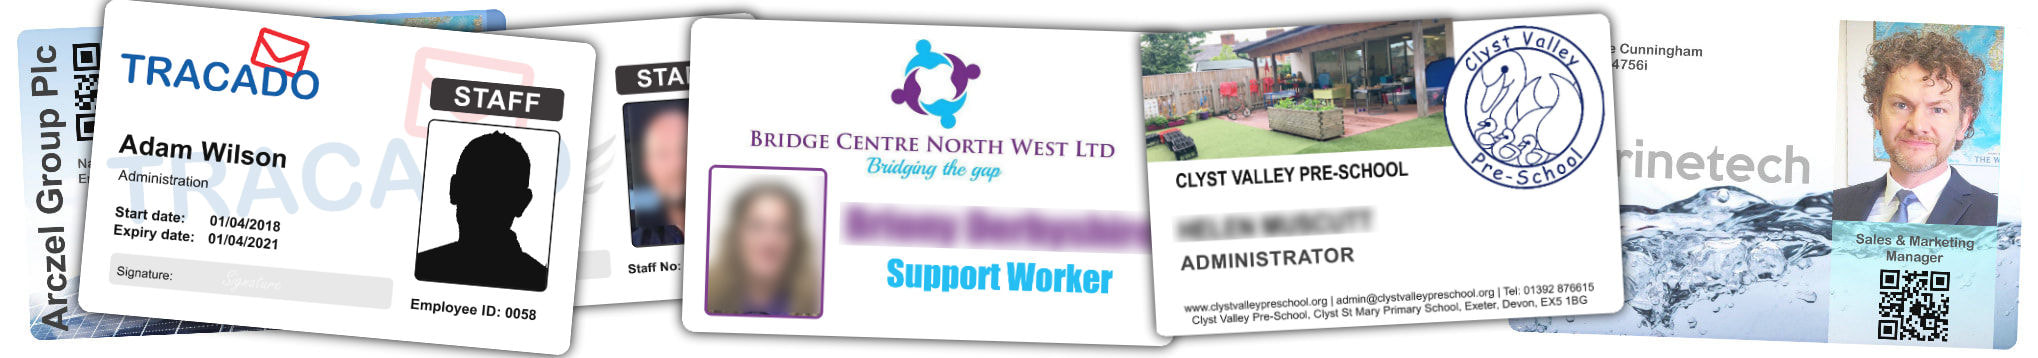 Nuneaton examples of staff photo ID cards | samples of employee Identity card printing | Workers ID cards printed in 